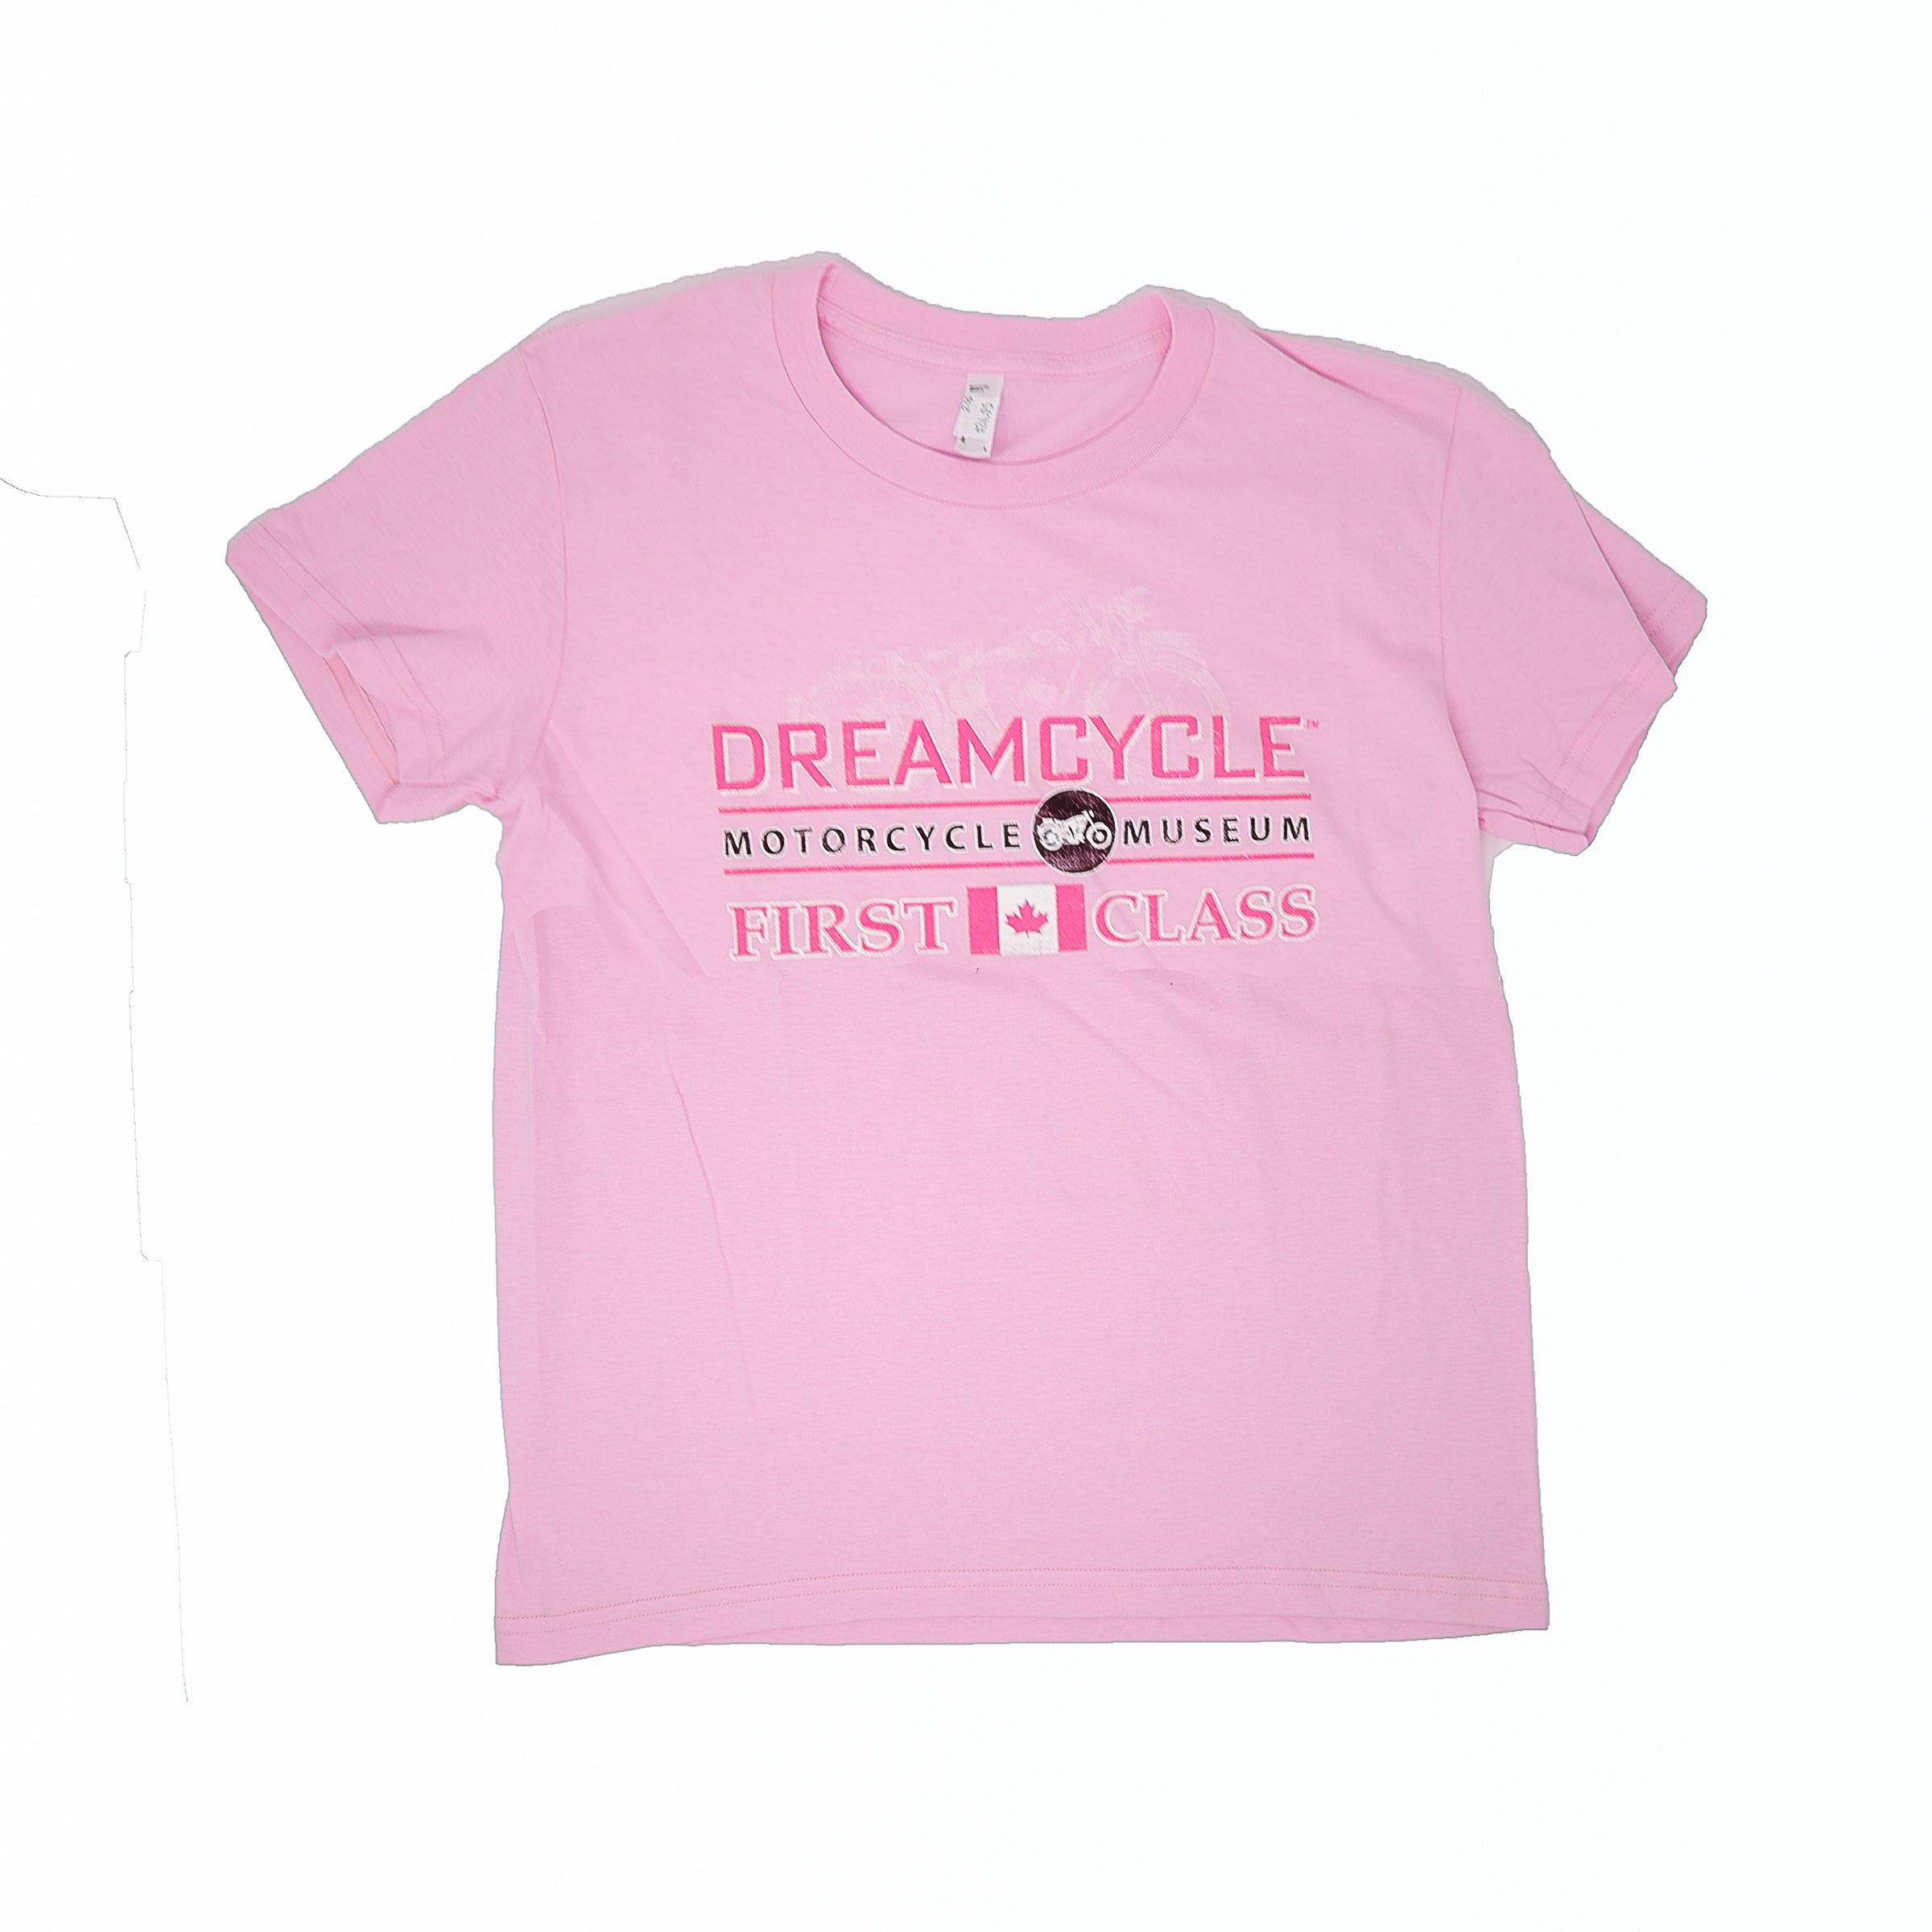 Dreamcycle Motorcycle Museum |  Pink dreamcycle tshirt on white background. 